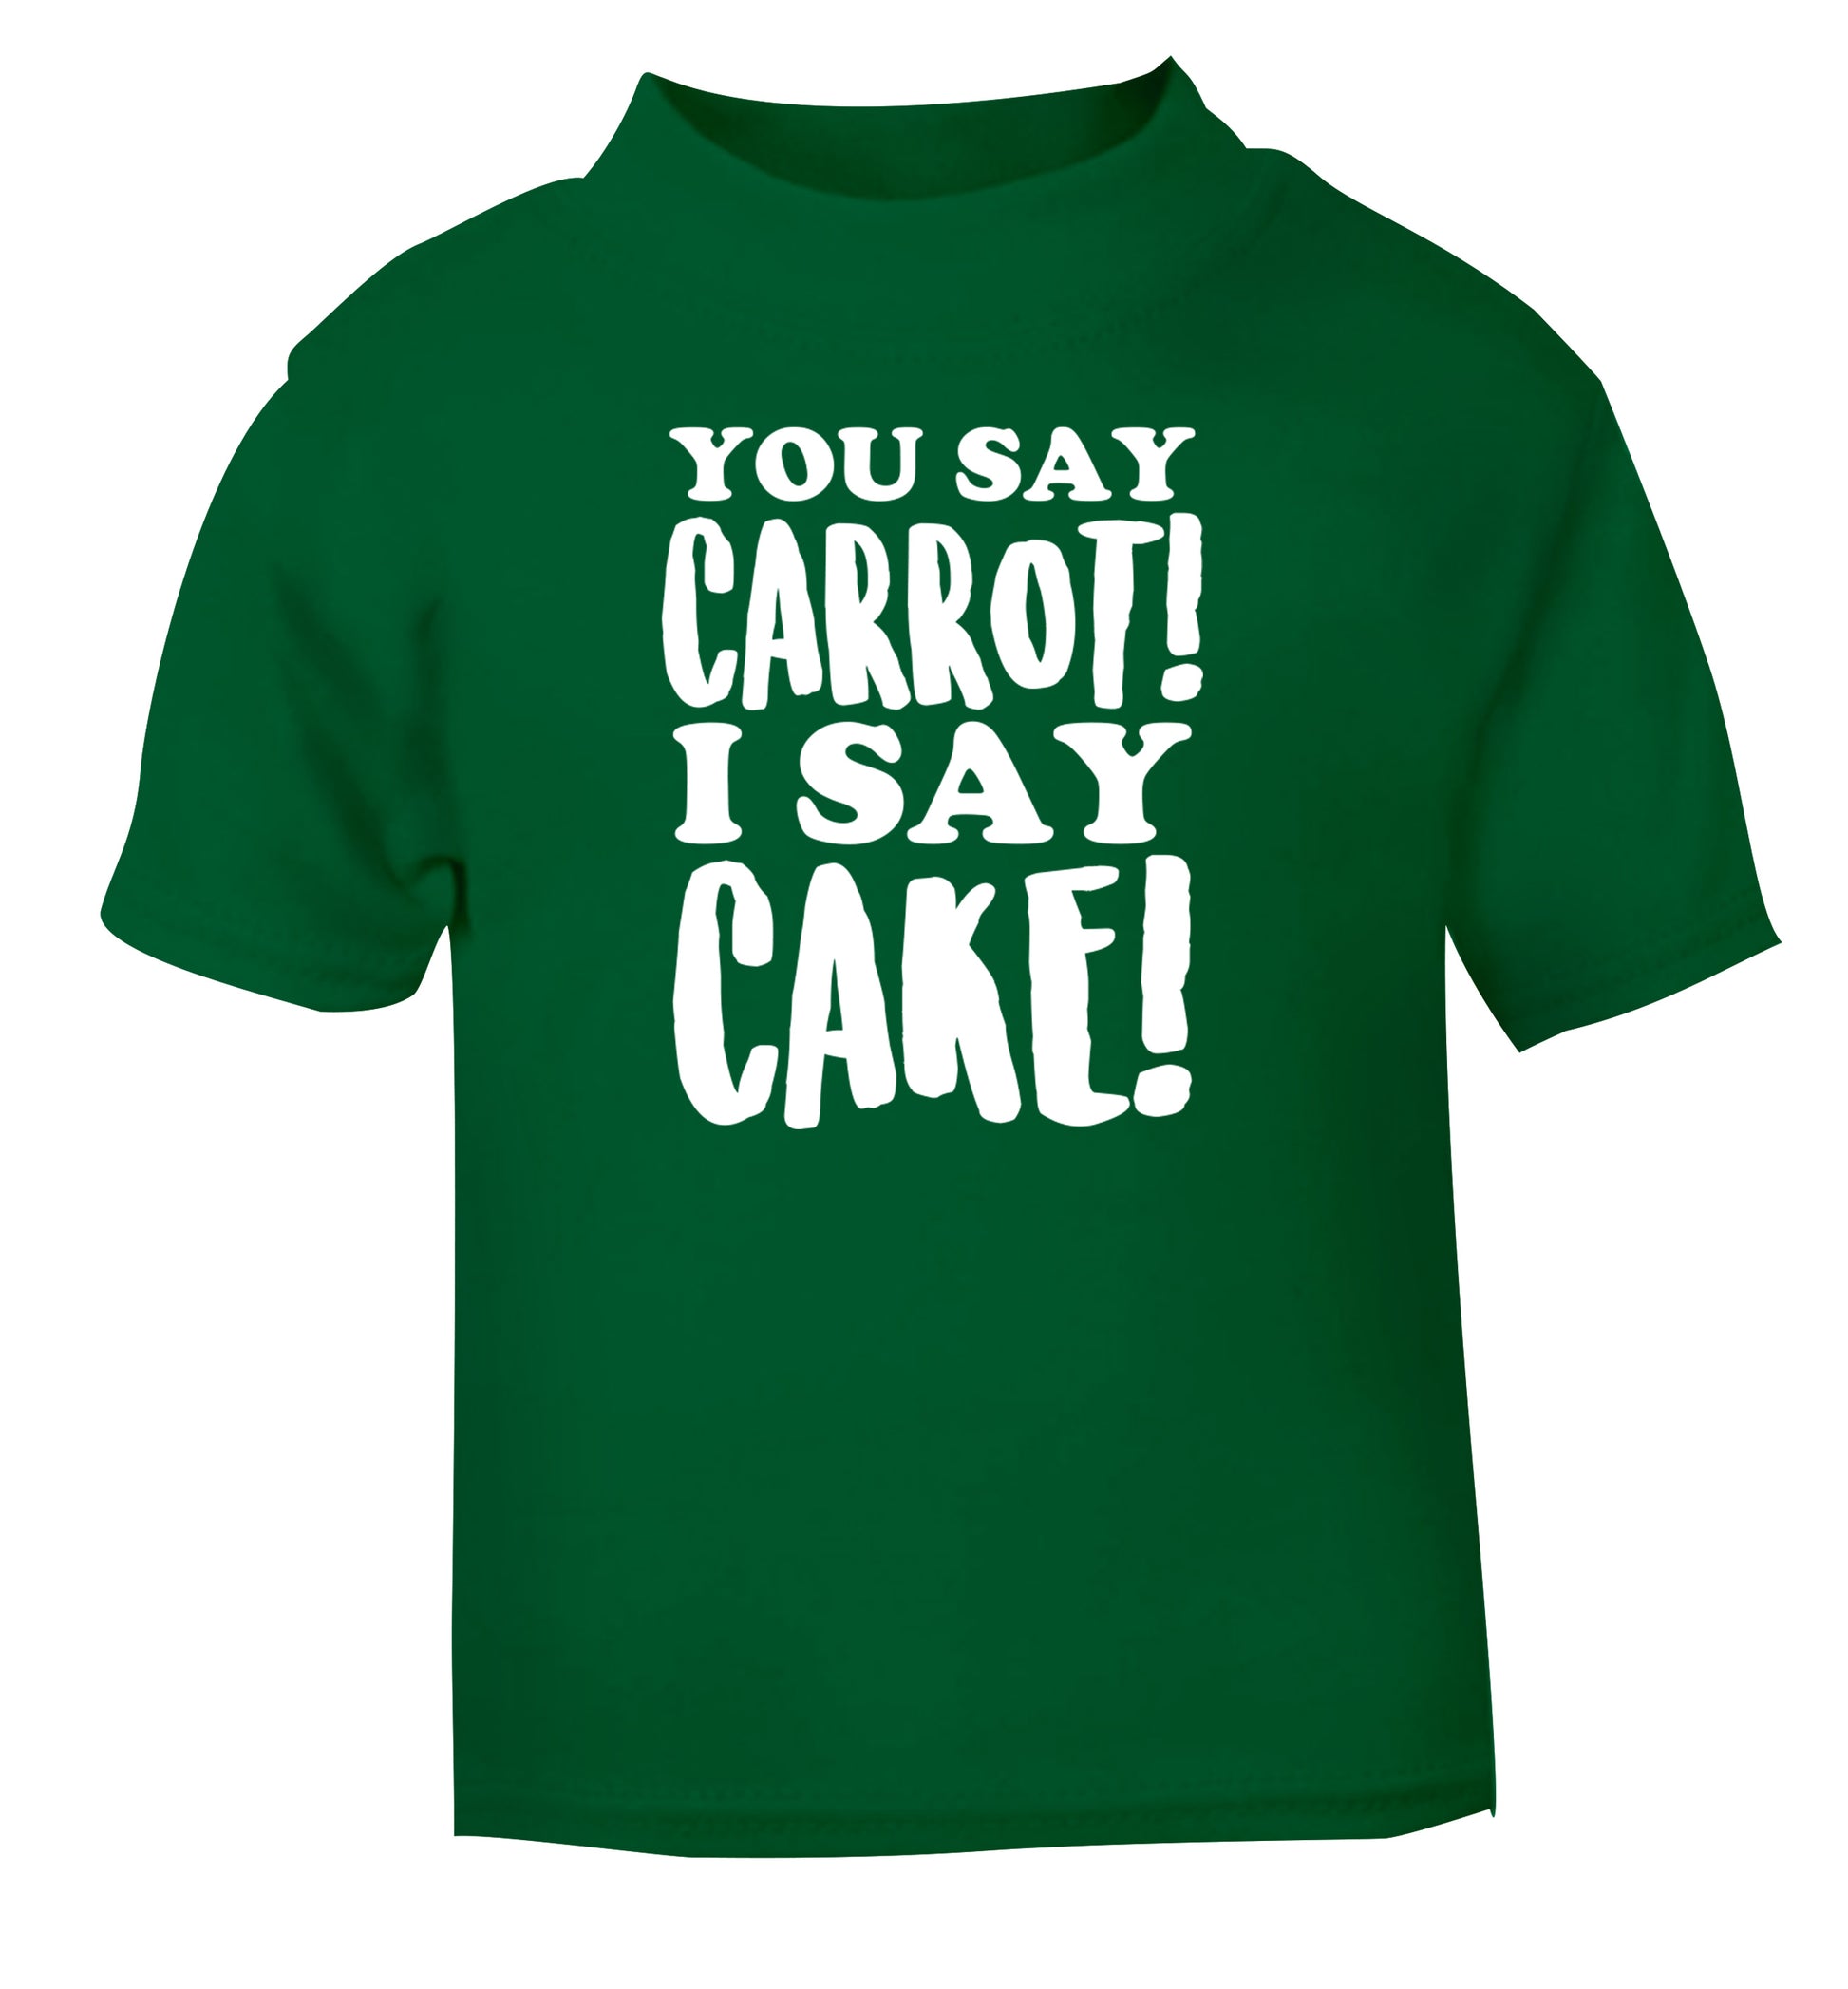 You say carrot I say cake! green Baby Toddler Tshirt 2 Years